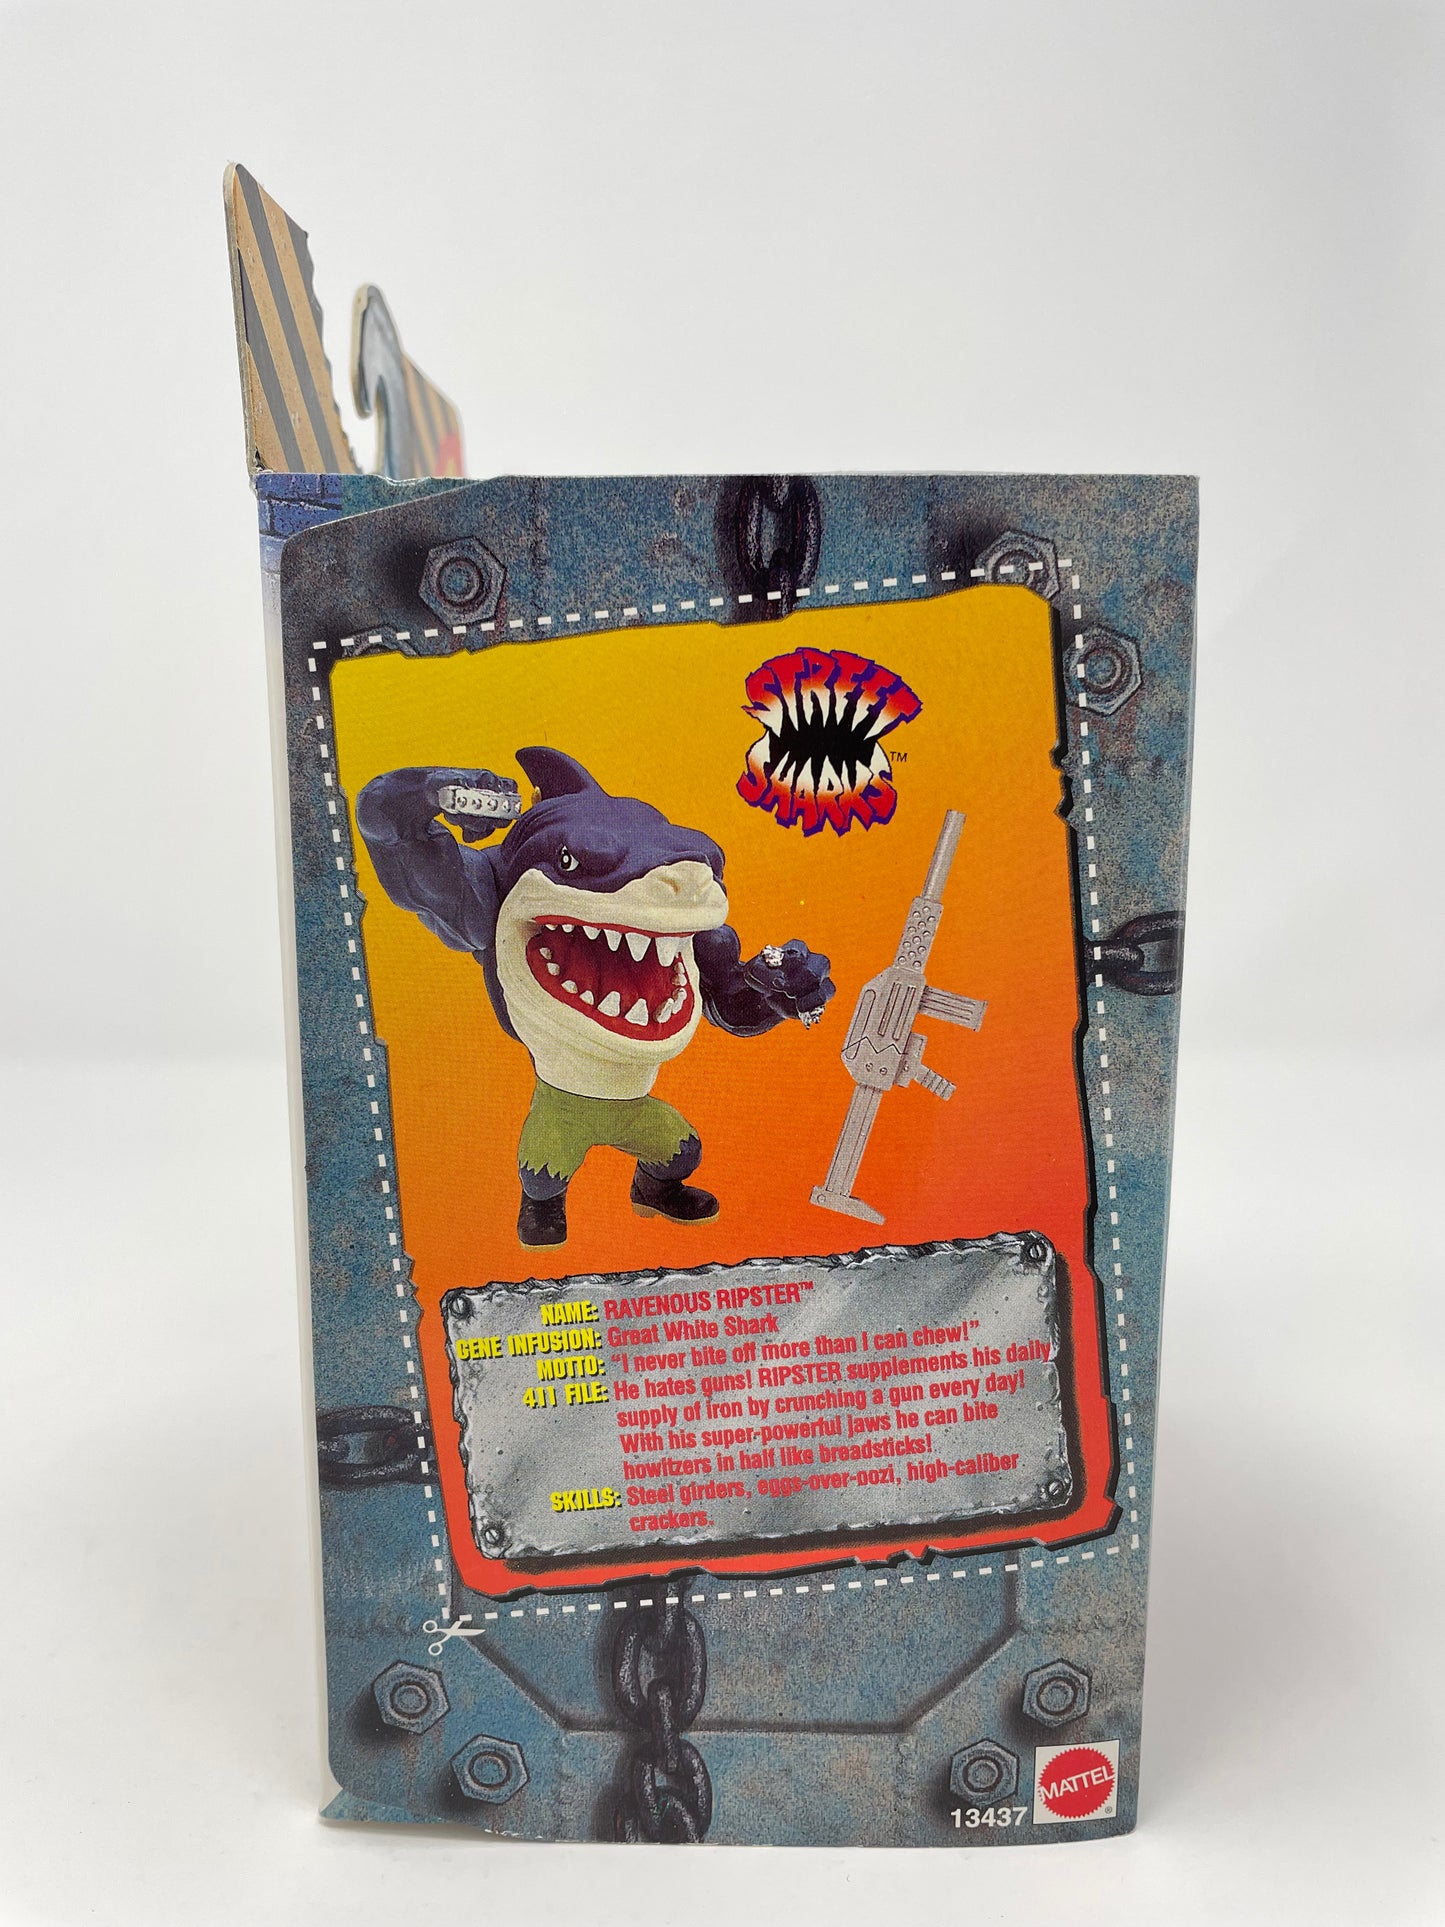 Ravenous Ripster - Street Sharks Wave II (3 of 4)